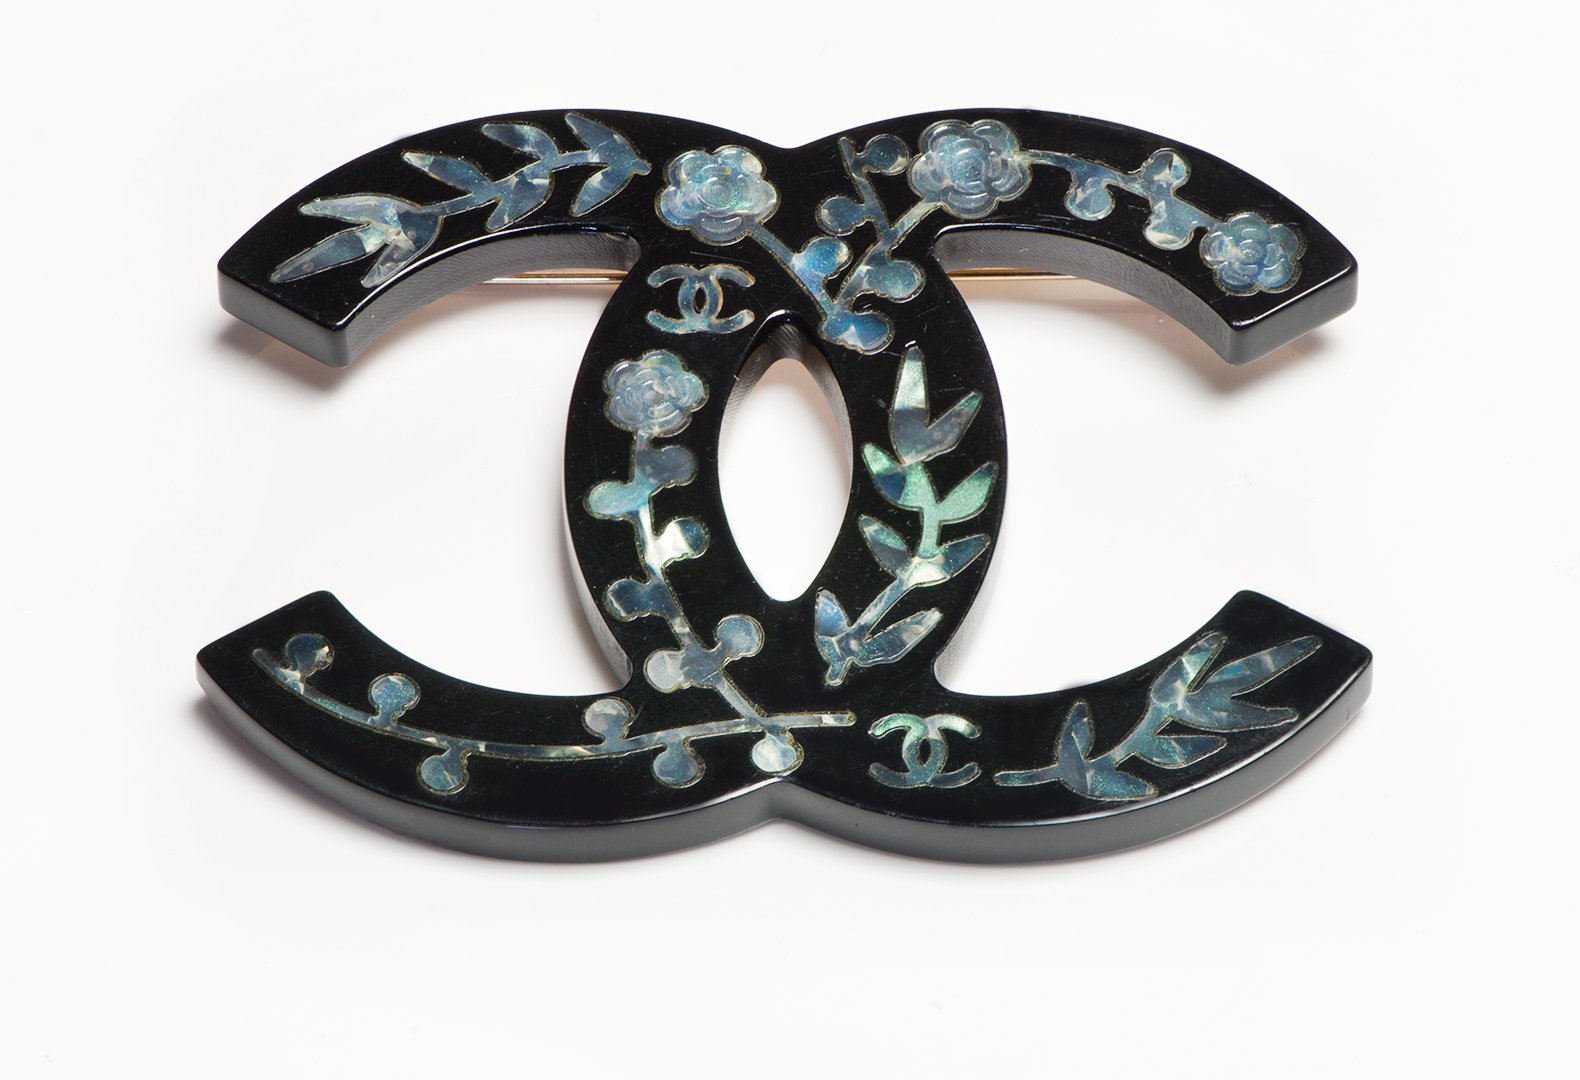 Chanel Paris Fall 2010 CC Black Resin Inlaid Mother of Pearl Camellia Brooch